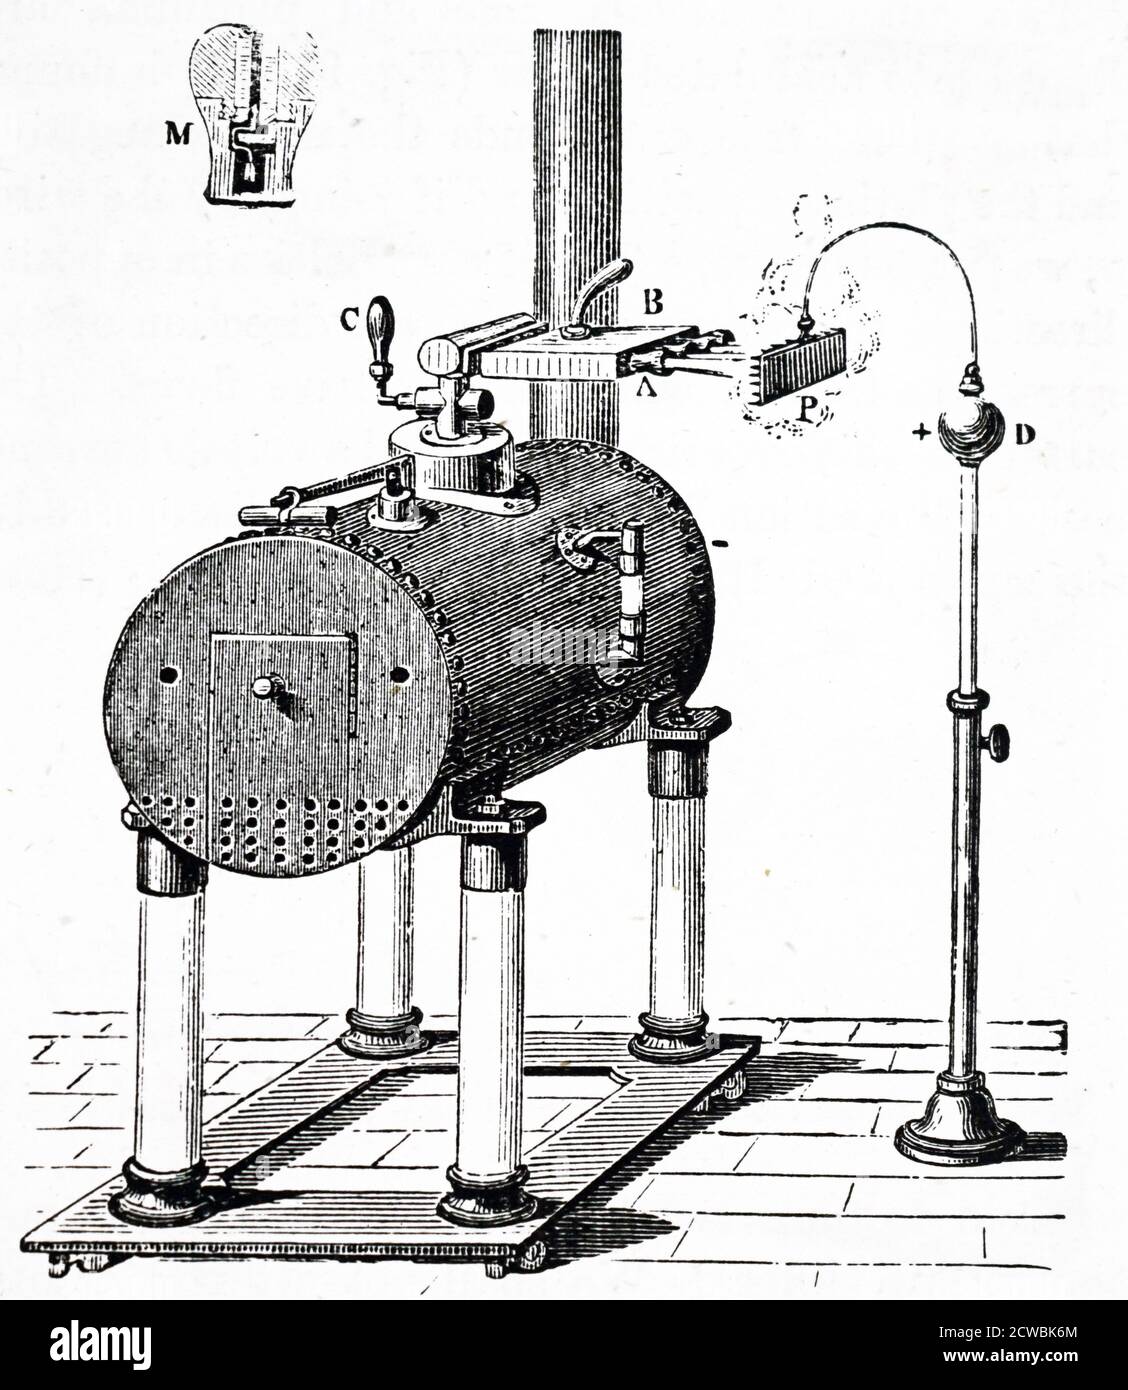 Engraving depicting William Armstrong's hydro-electric machine. The boiler was mounted on insulated pillars and the steam electrified positively, the boiler negatively. Sparks almost two feet long were generated. Stock Photo